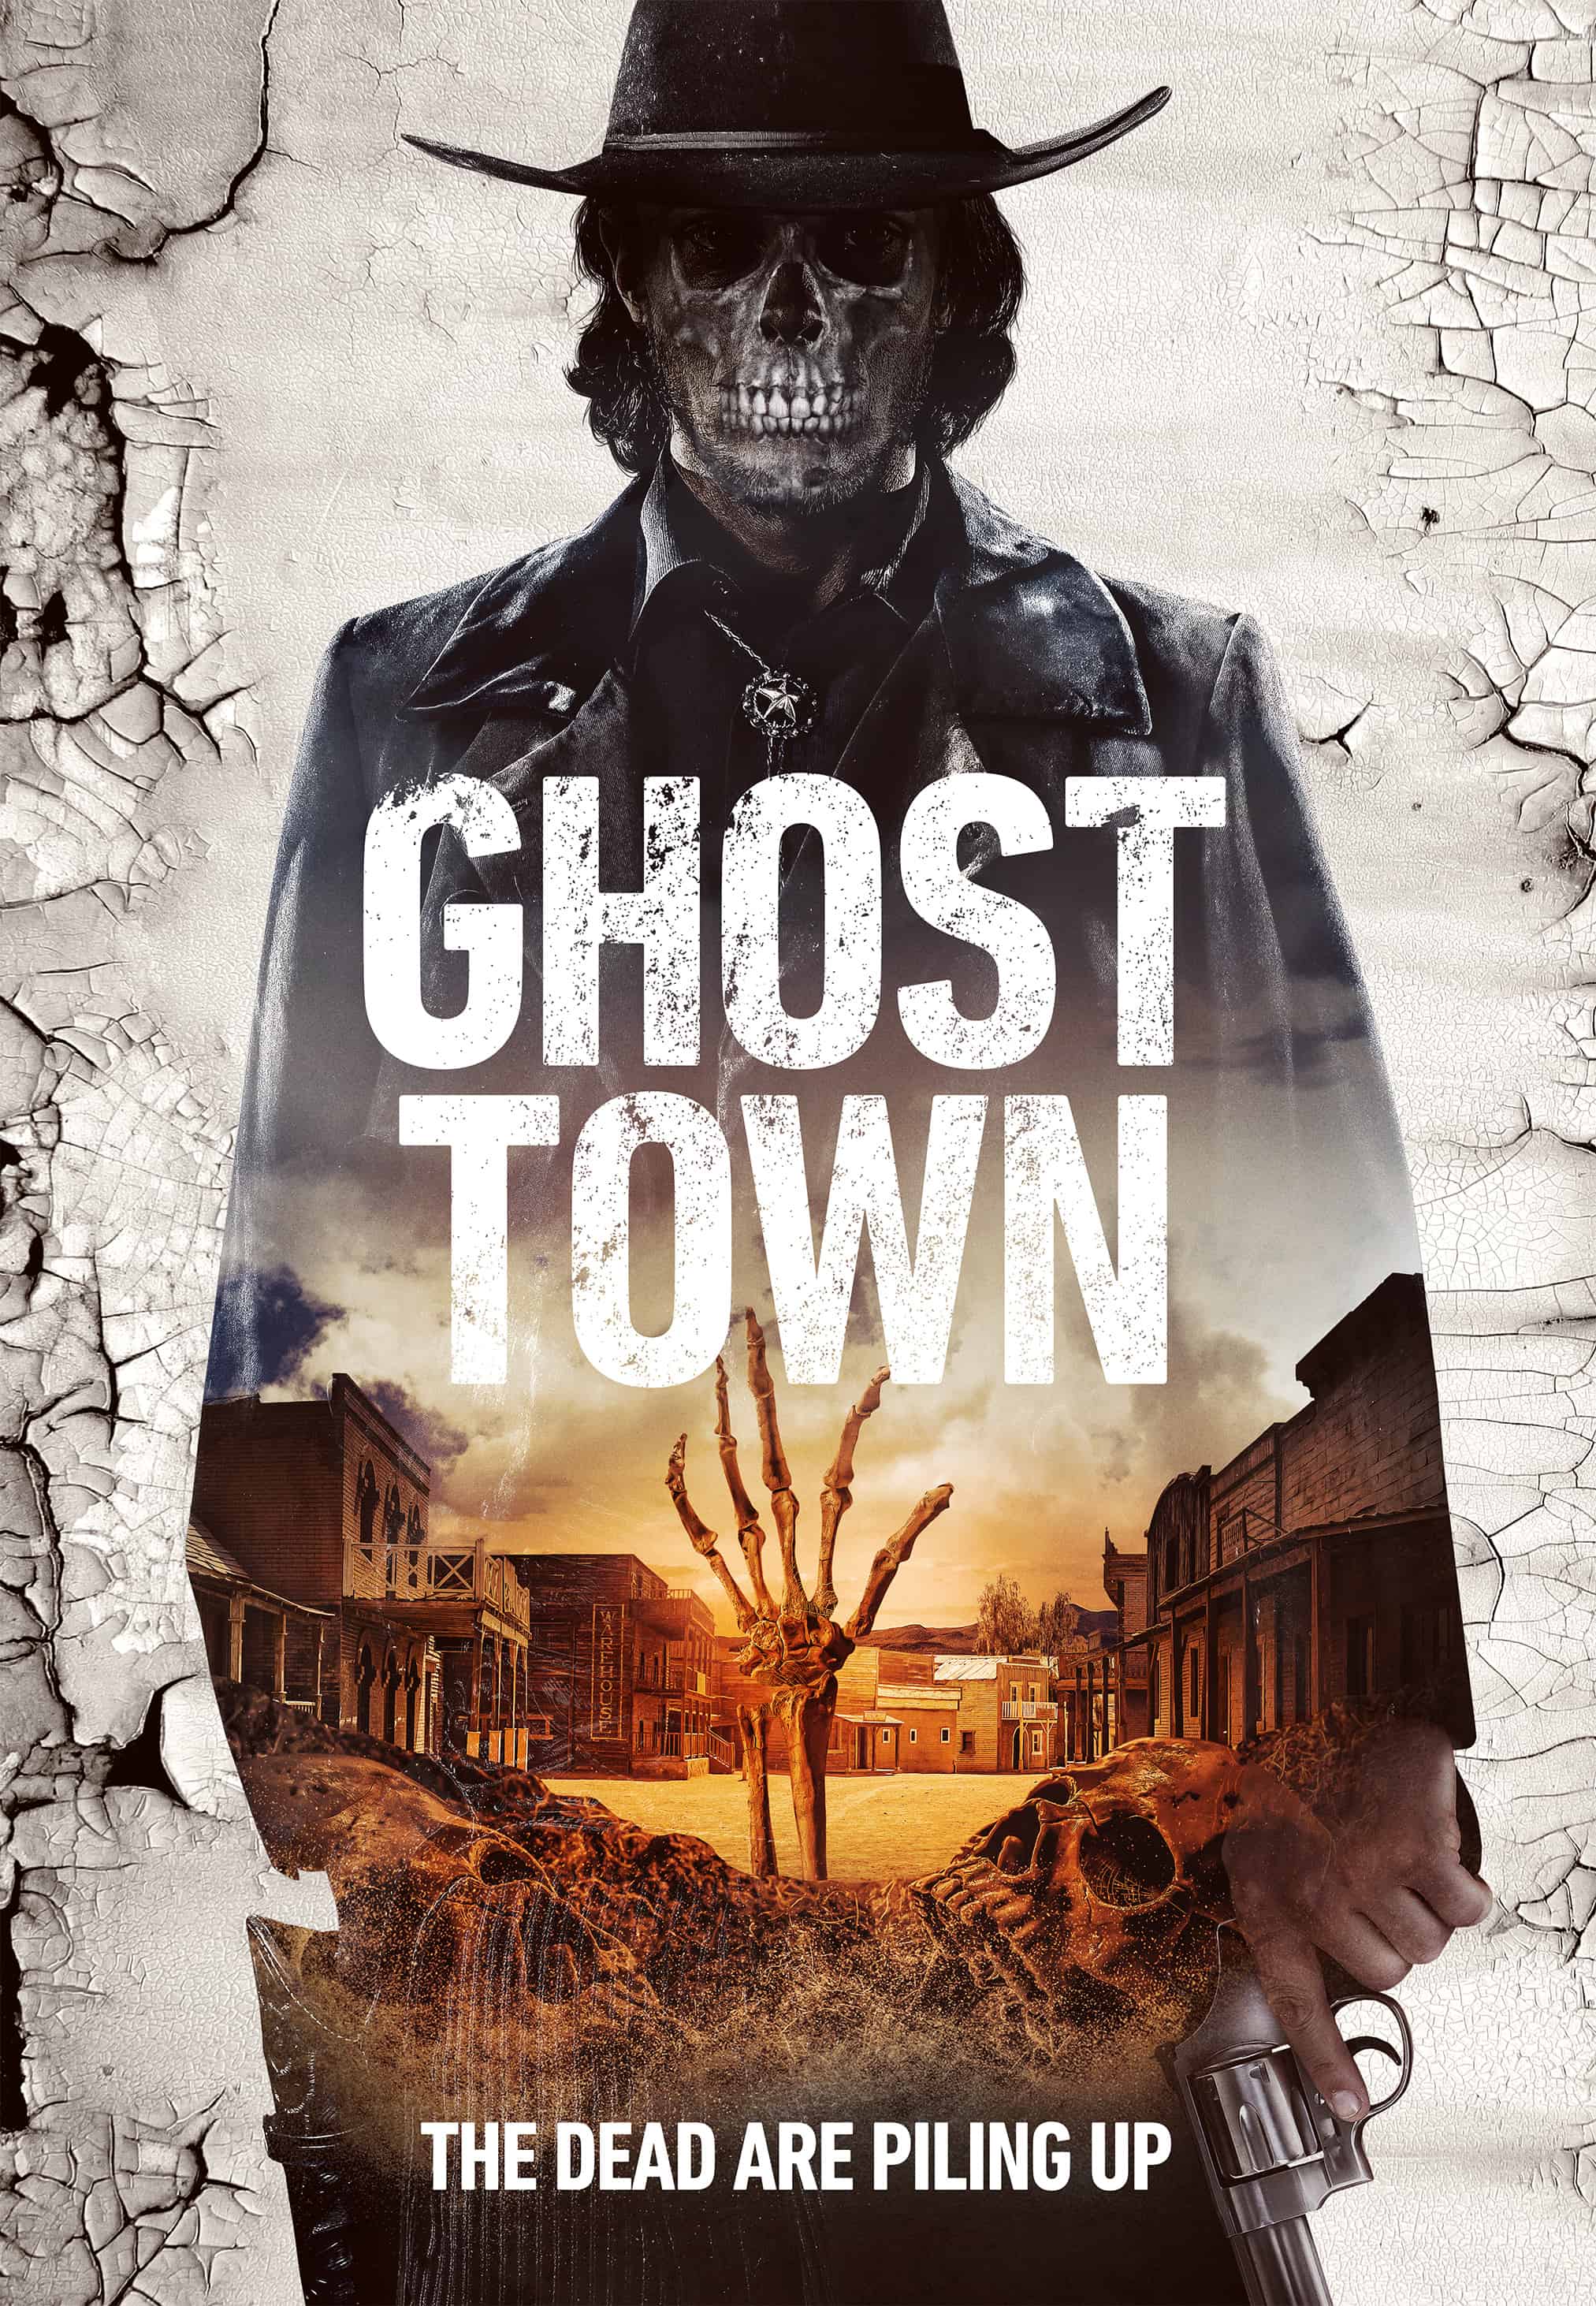 Ghost Town offers up a poster and trailer arrives March 7th 5